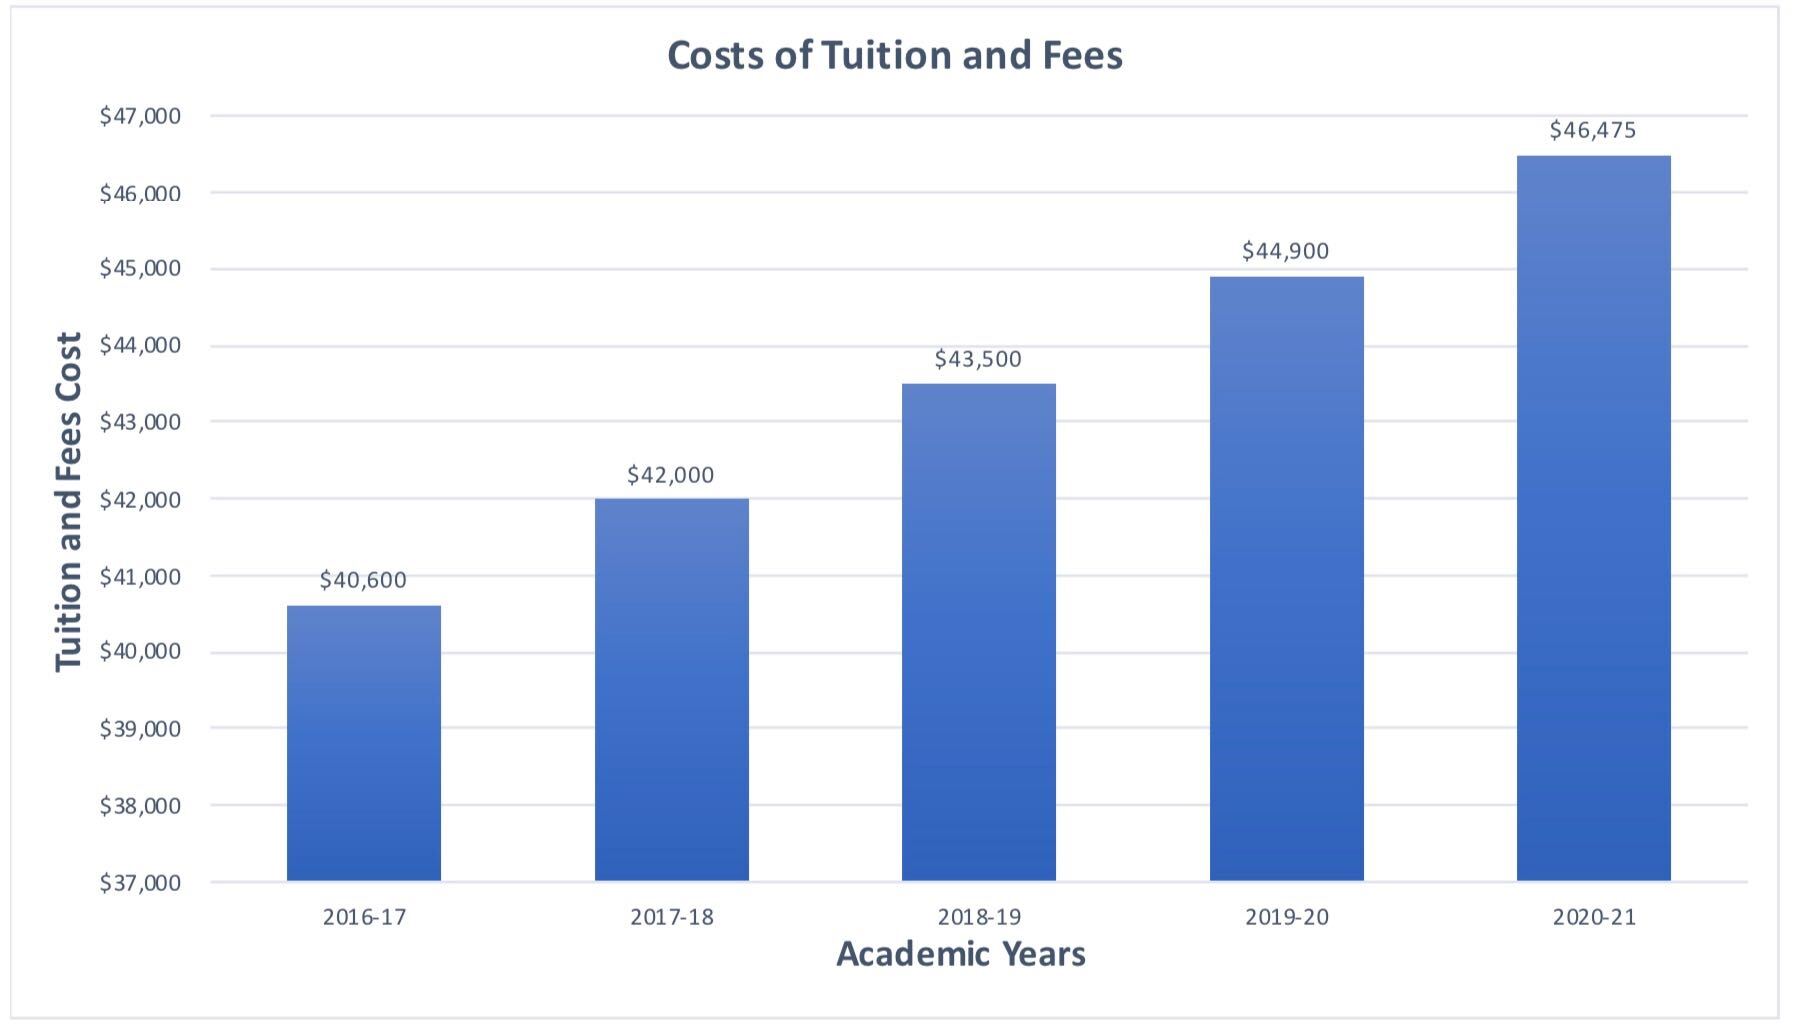 University tuition fees